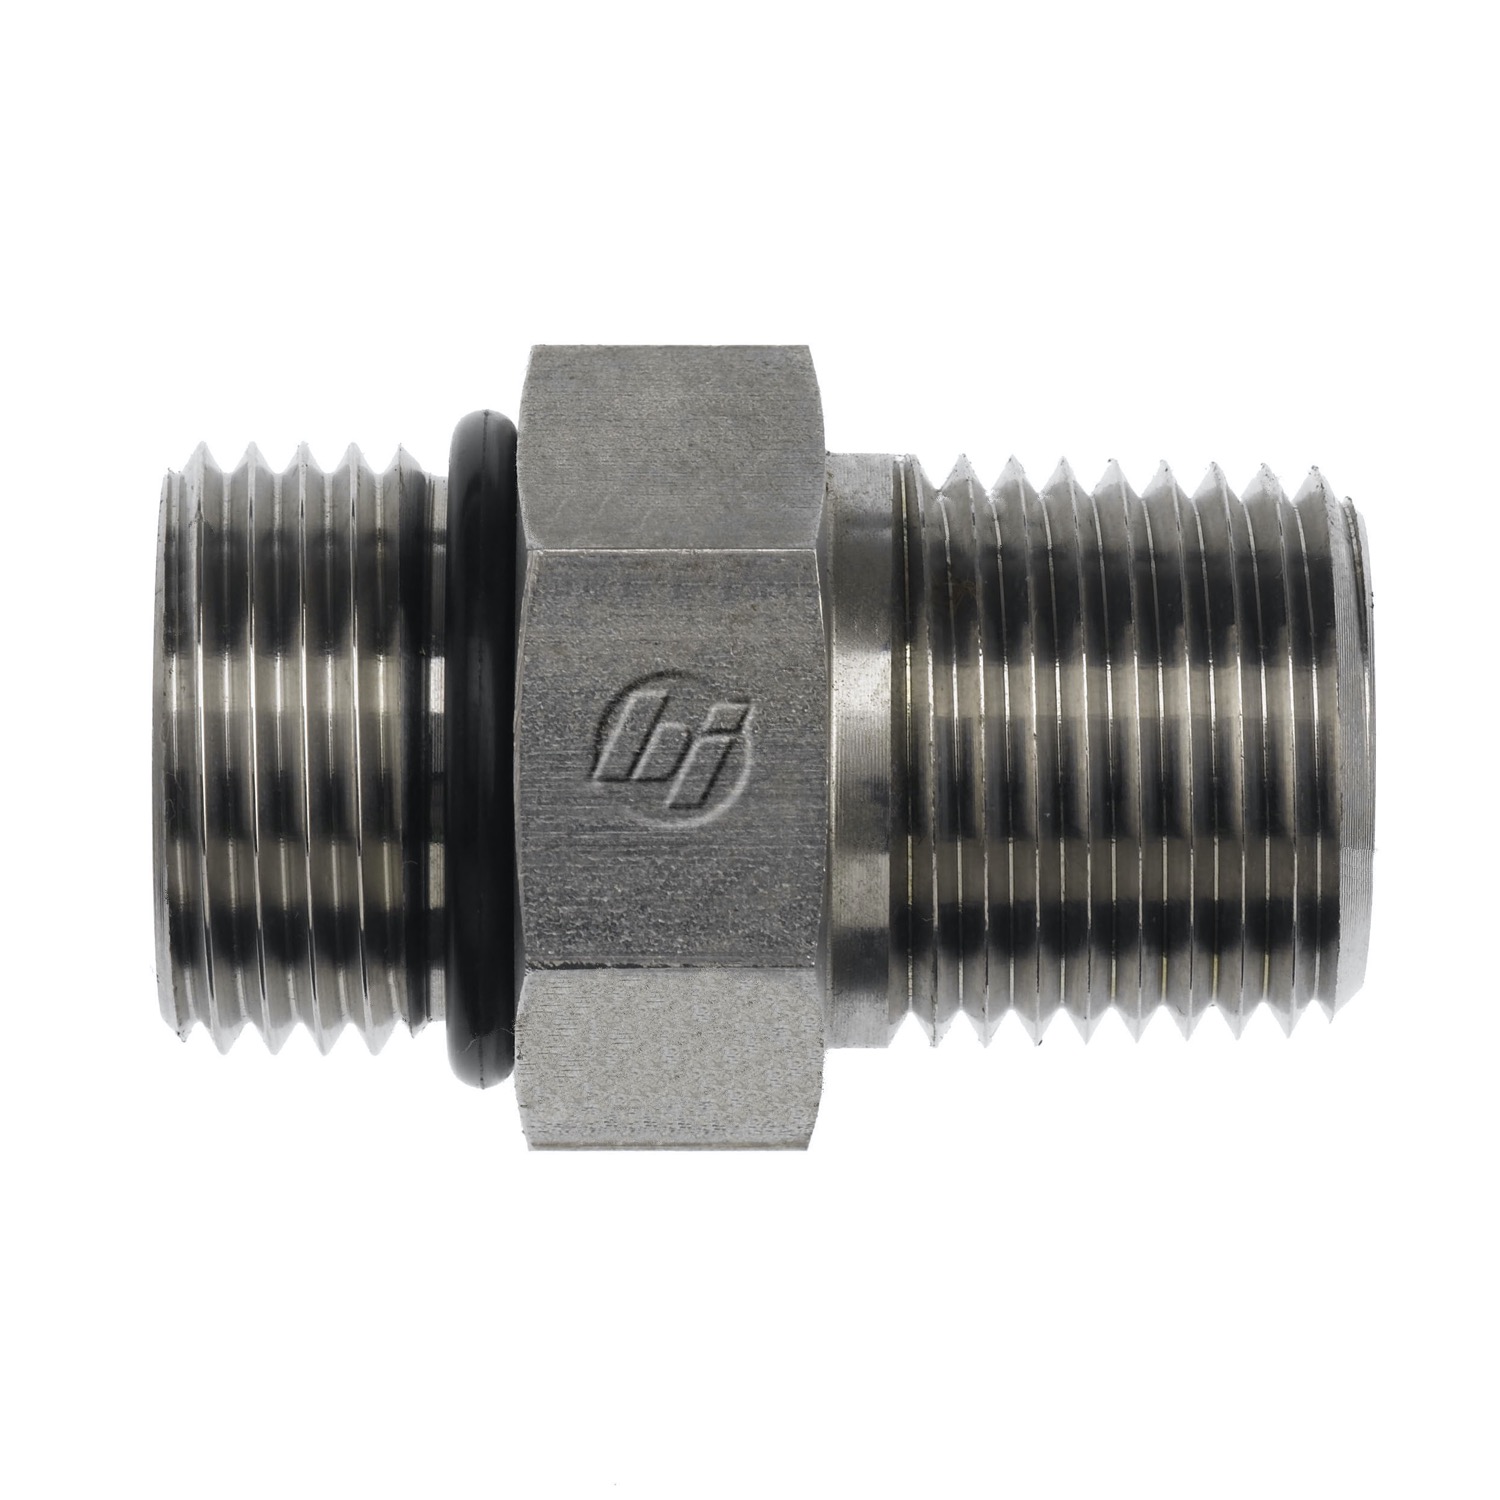 Hydraulic Hose Adapters - Straight Fitting, O-Ring Boss to NPTF, 6401 Series 6401-06-02-O